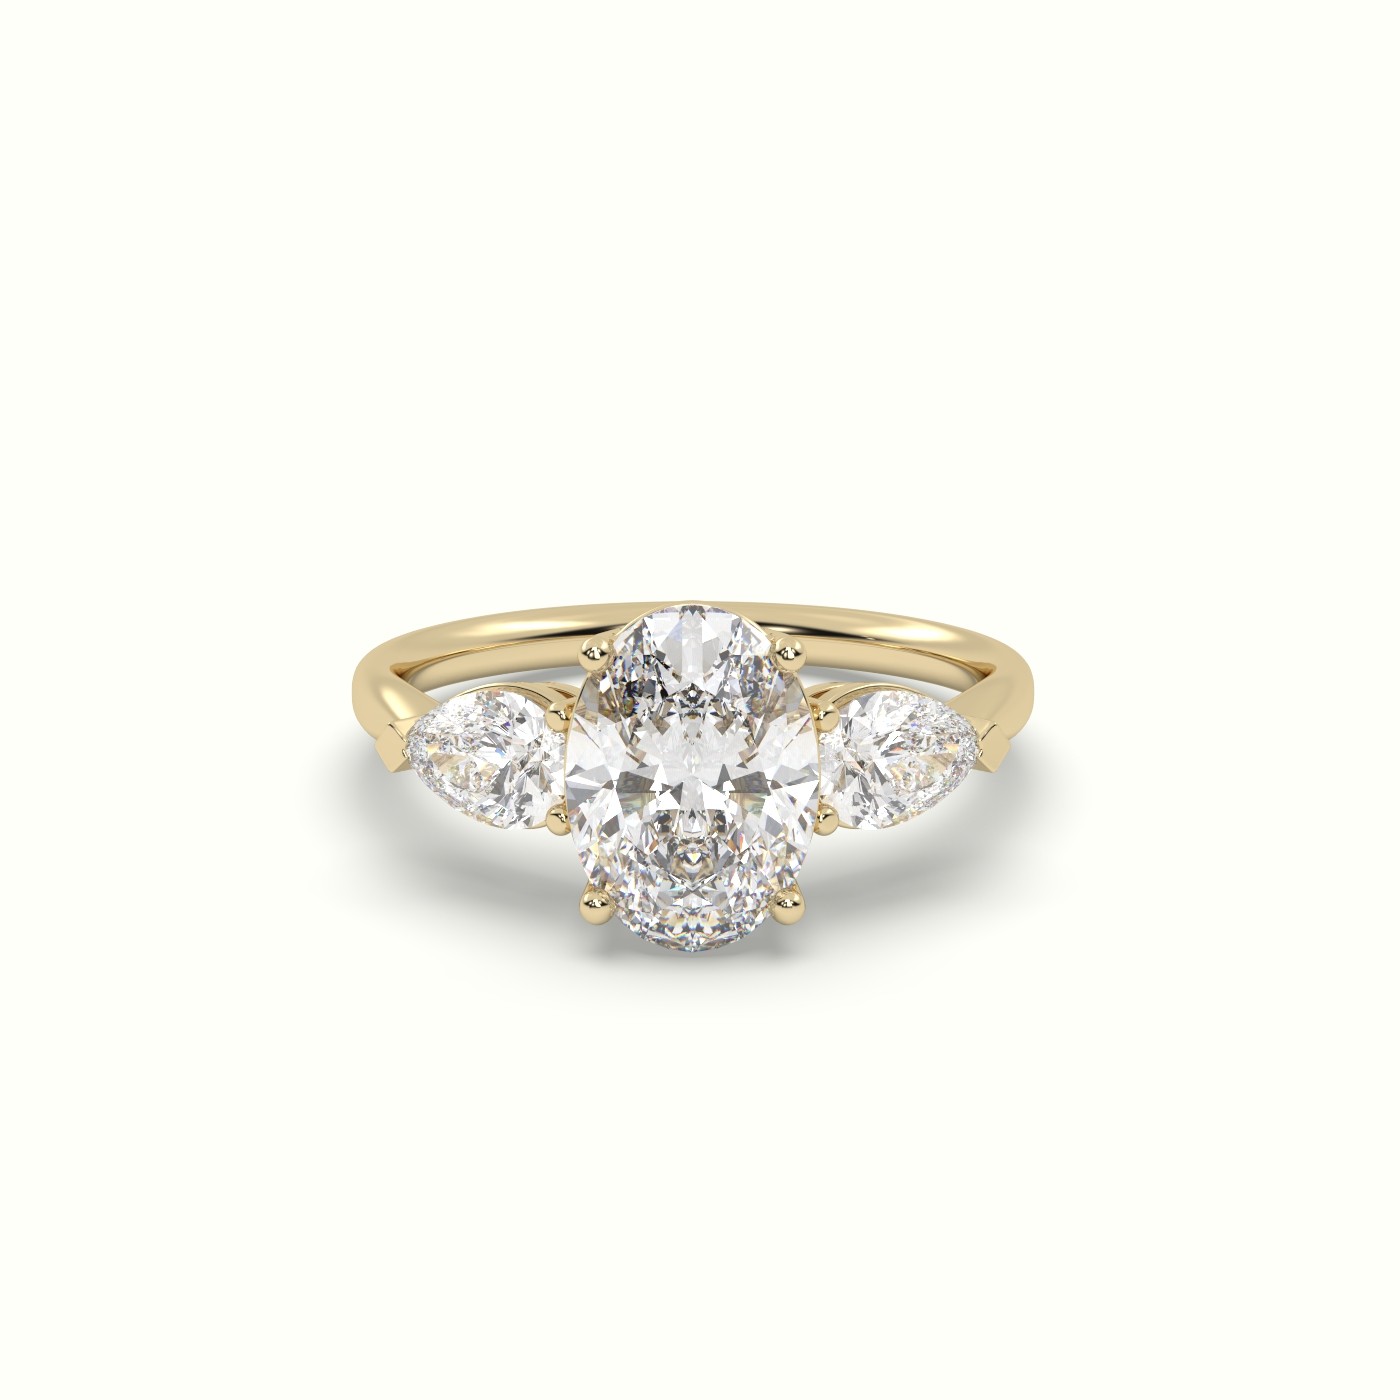 18K YELLOW GOLD Oval Diamond 4 round prongs Trilogy Ring pear shape side stone